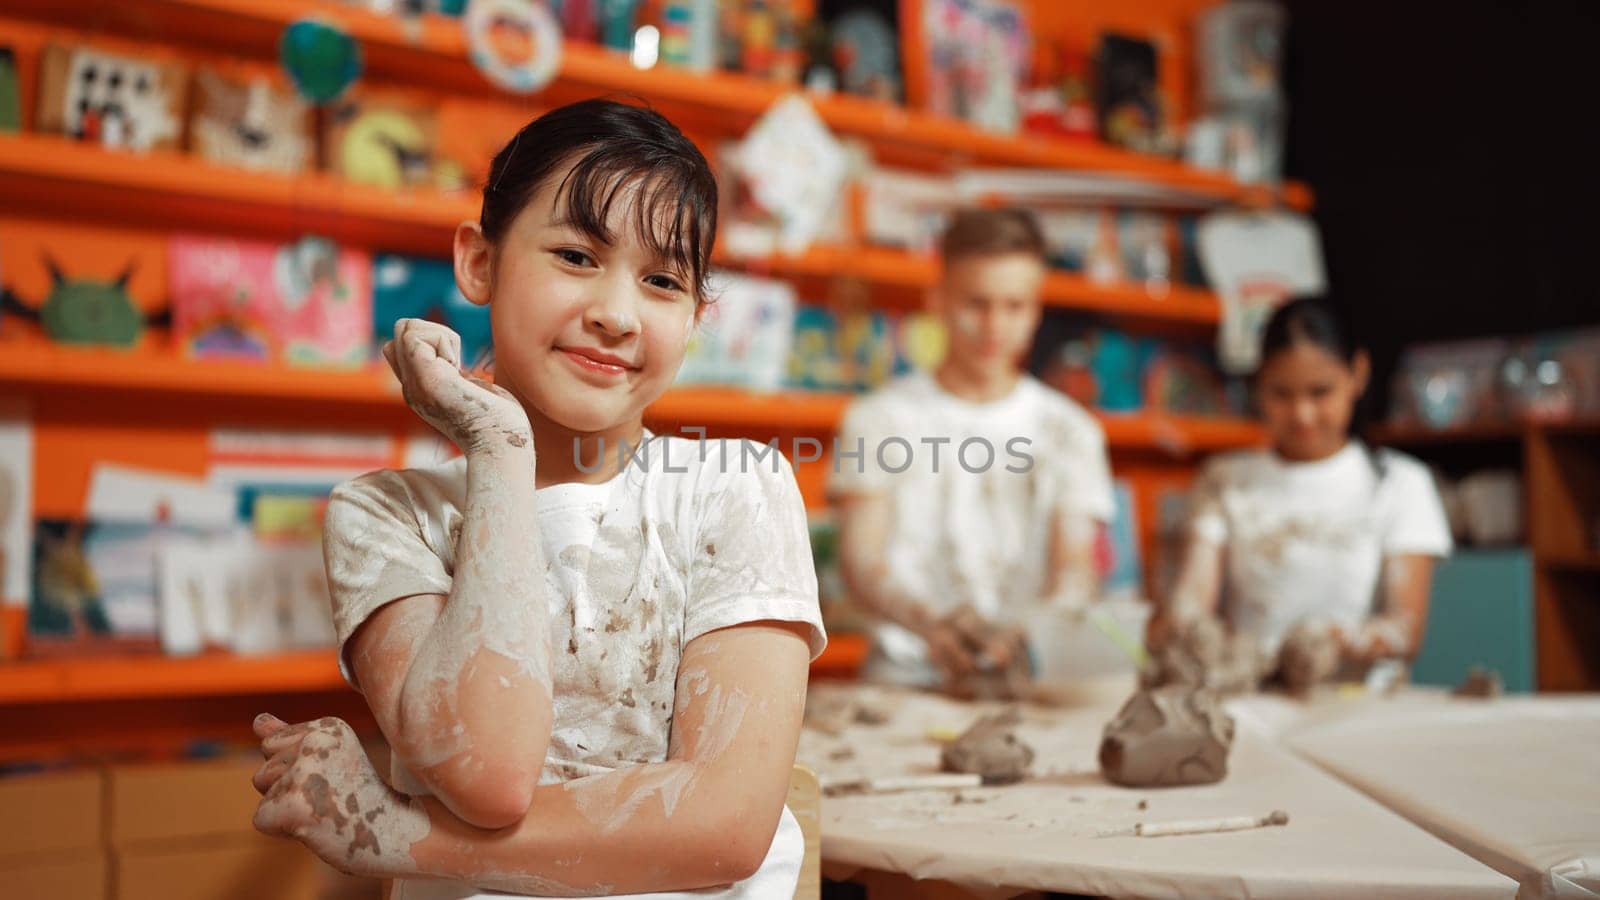 Girl look at camera and hand while diverse children modeling clay. Edification. by biancoblue